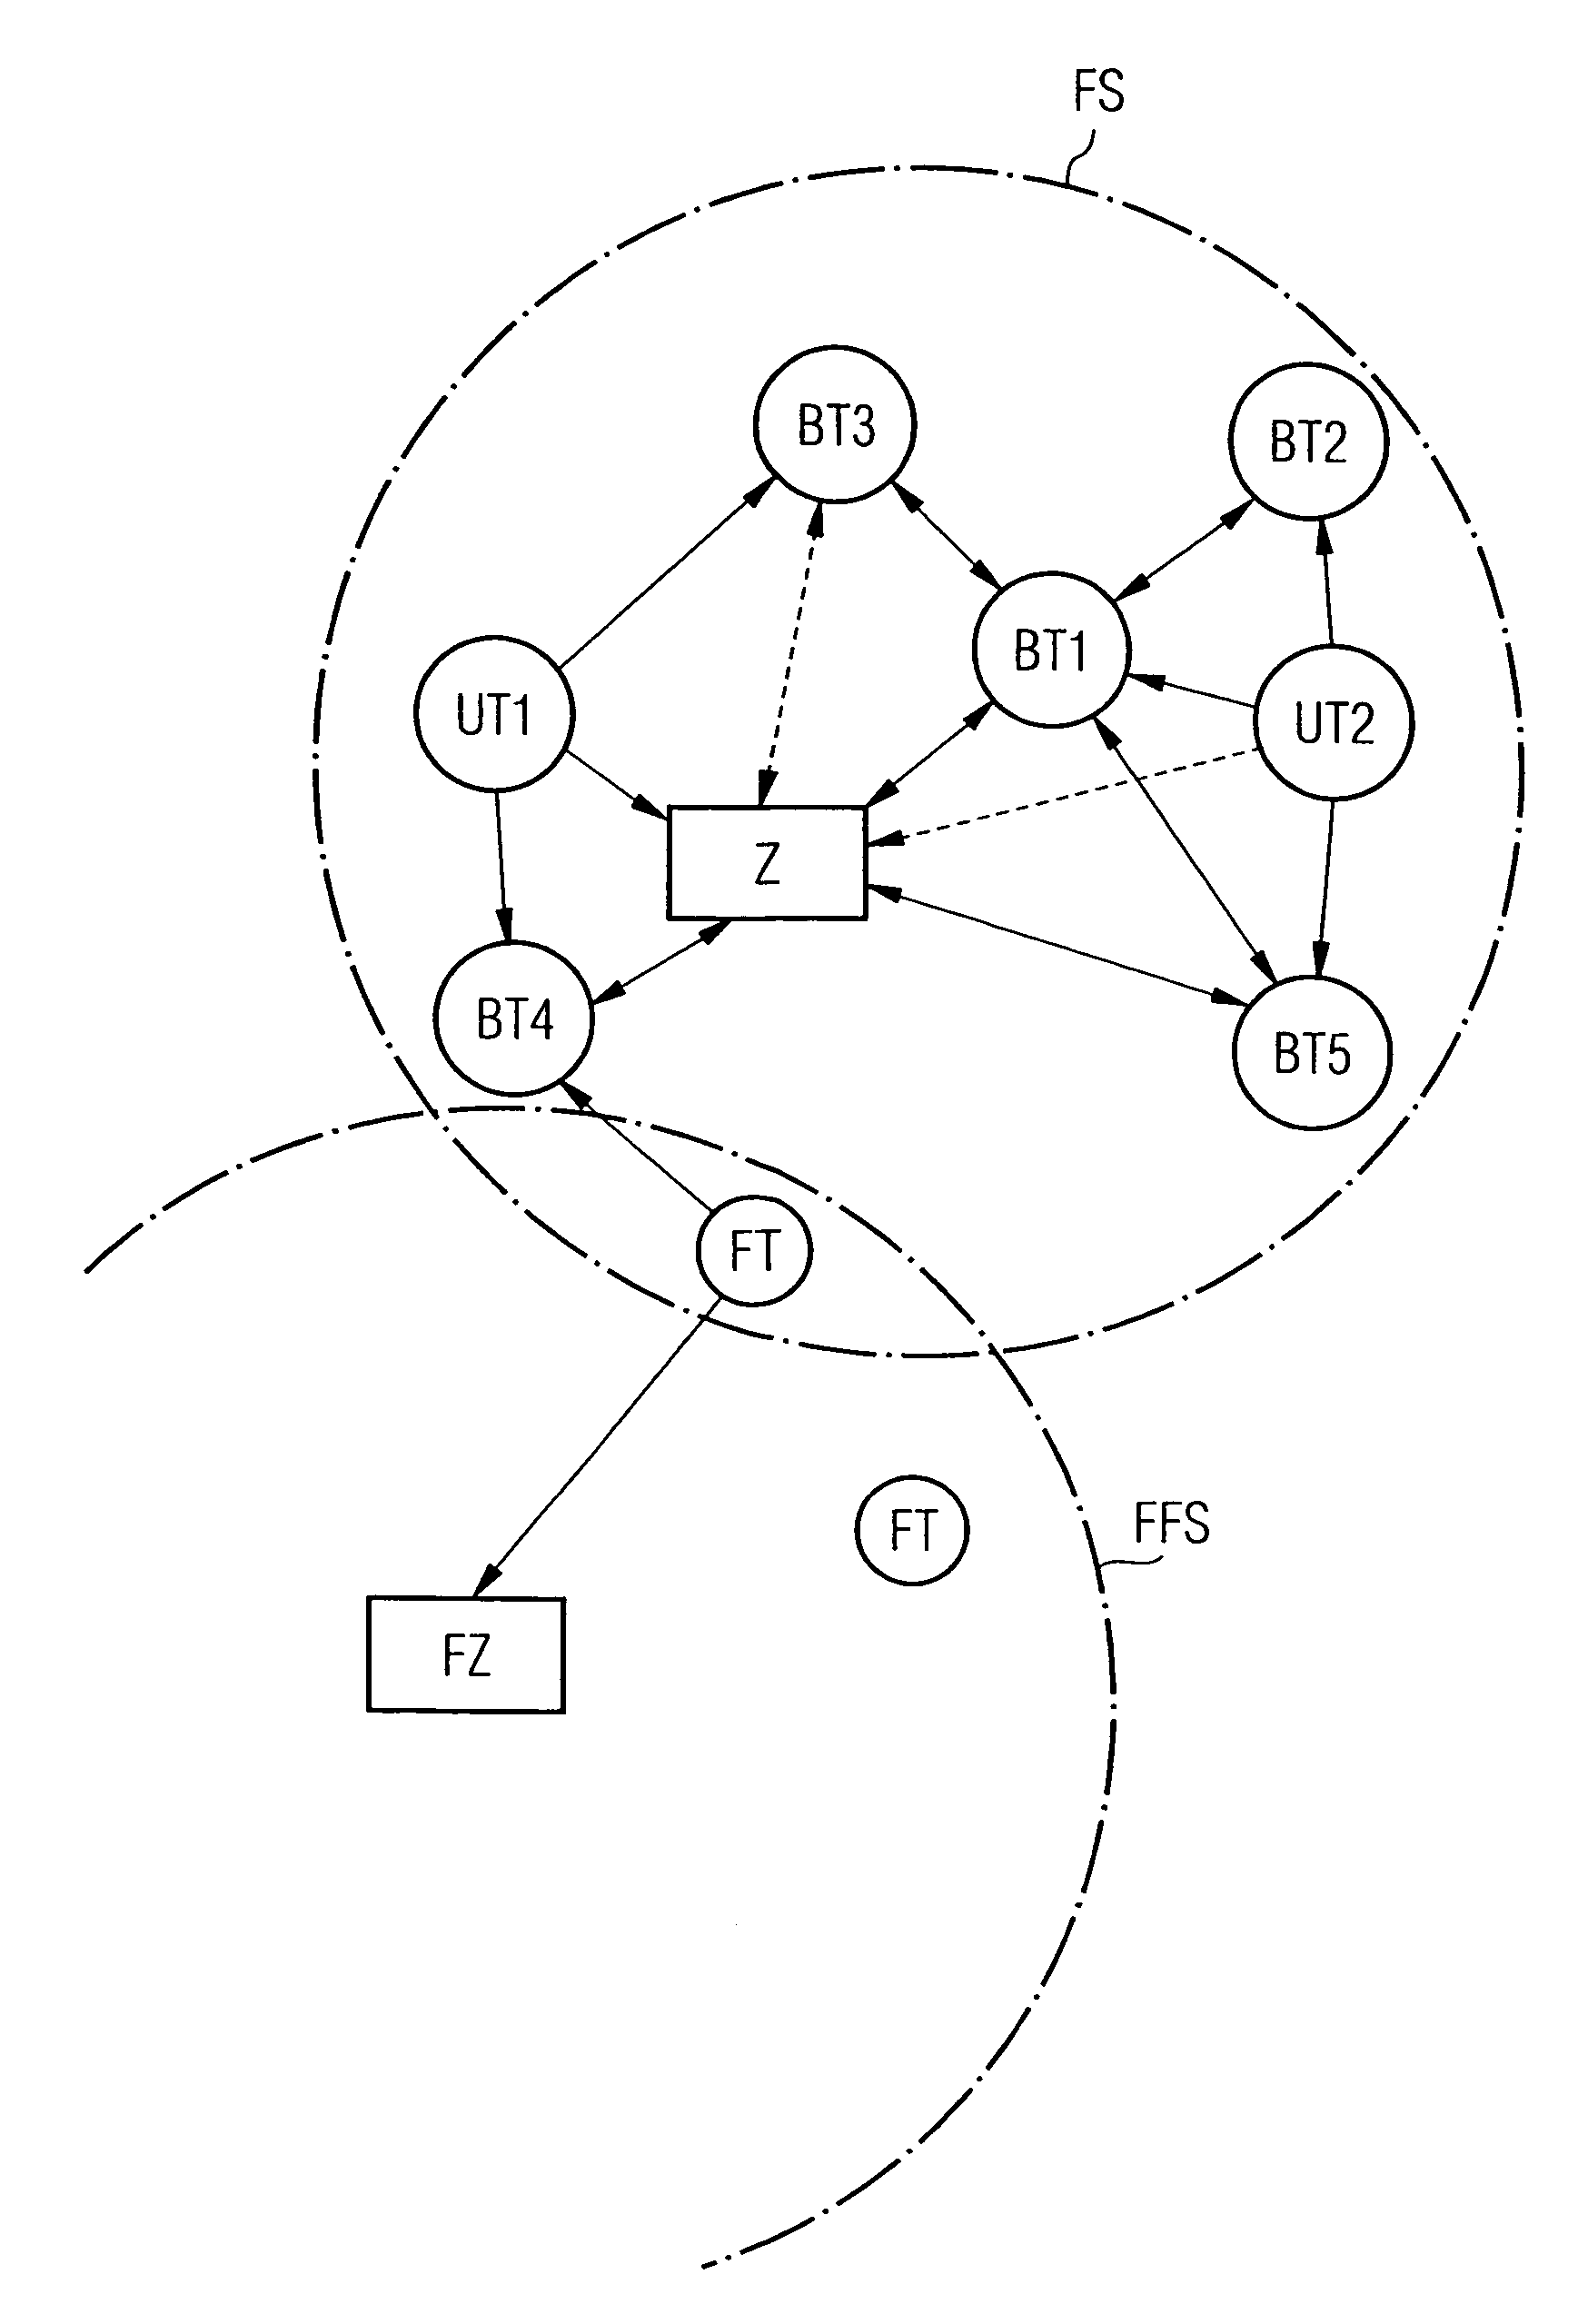 Method for radio transmission in an alarm signaling system